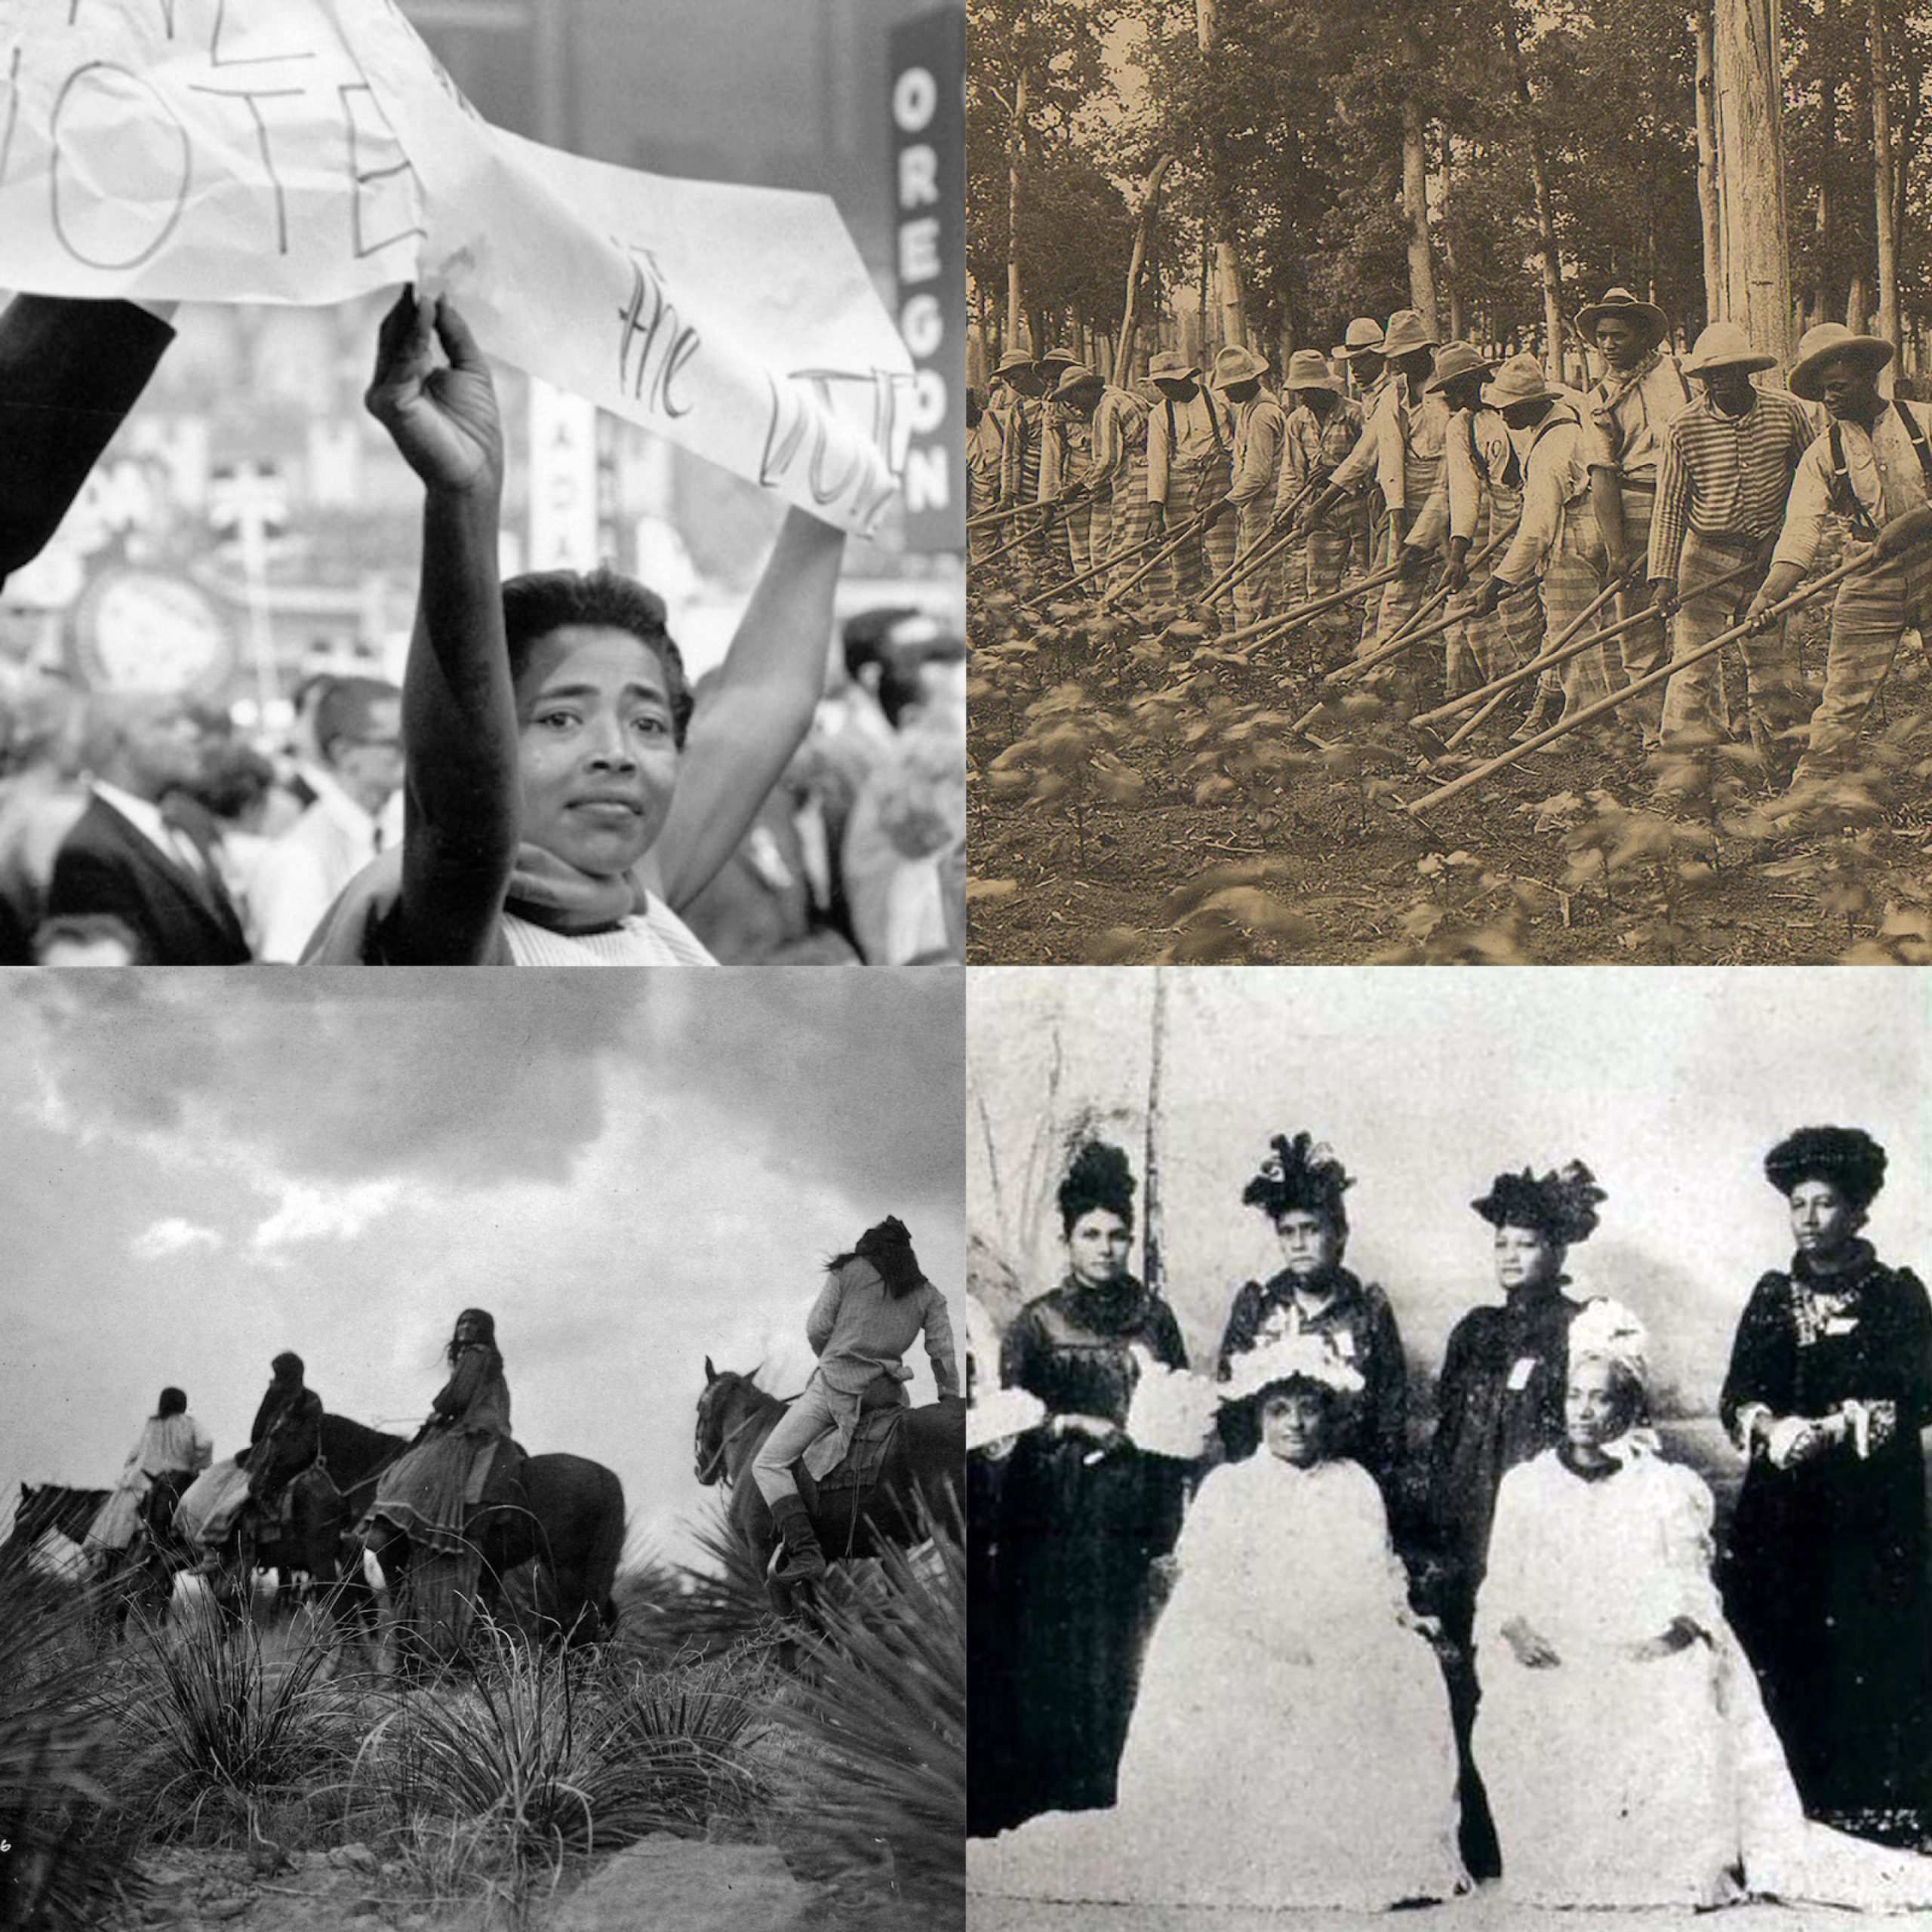 Collage of civil rights protestors, prison laborers farming, people riding horses, and the Hawaiian Patriotic League for Women